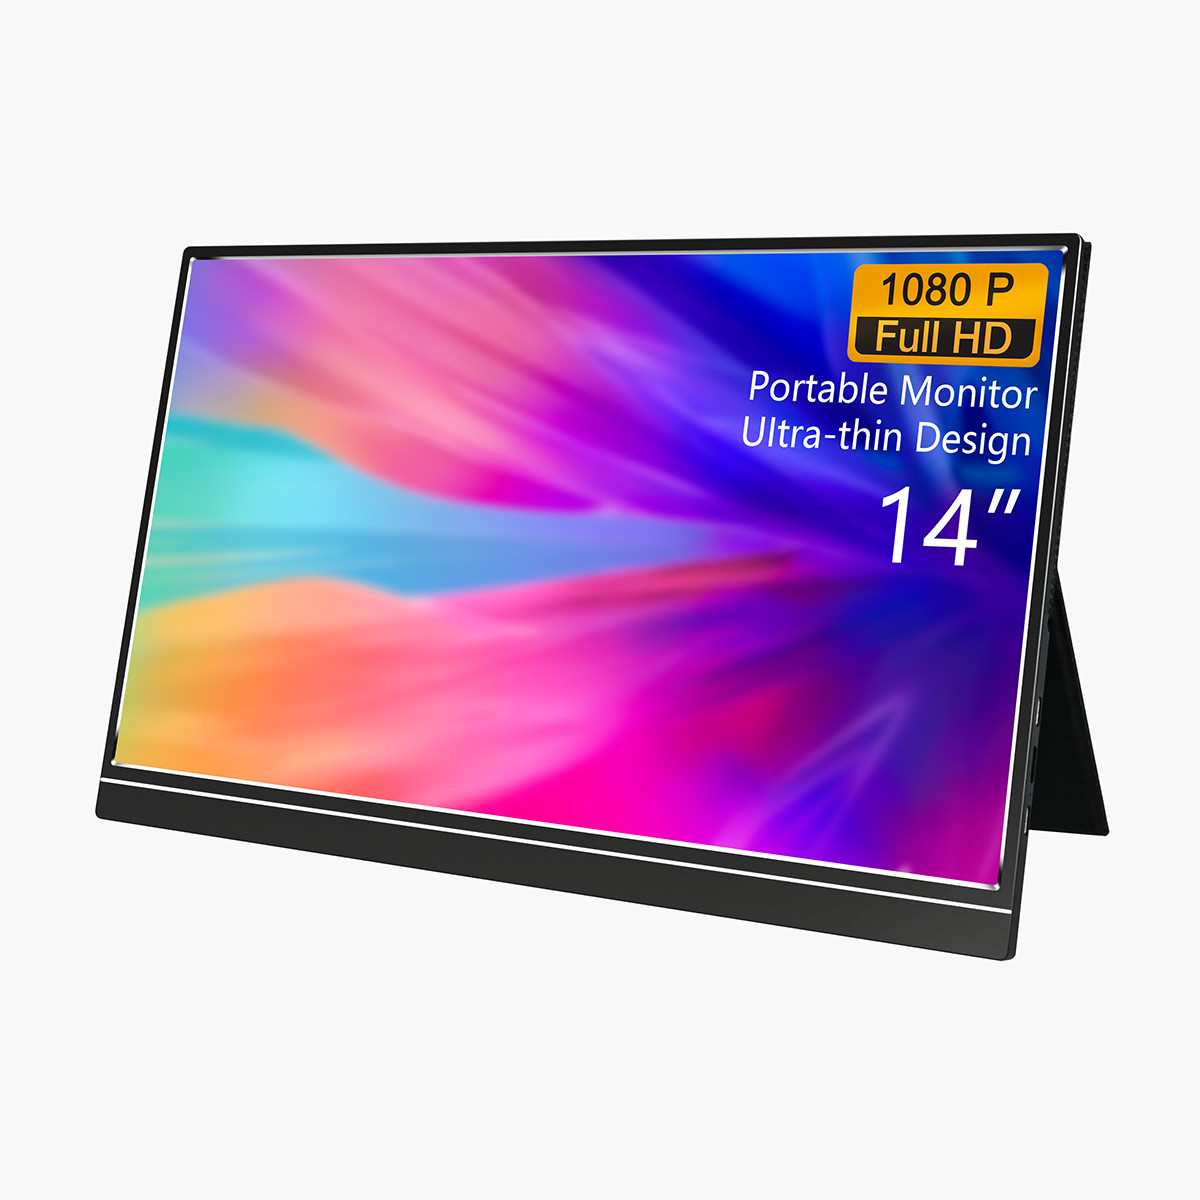 1080P Full HD 14 Inch Portable Monitor For PS4 / XBOX ONE / SWITCH